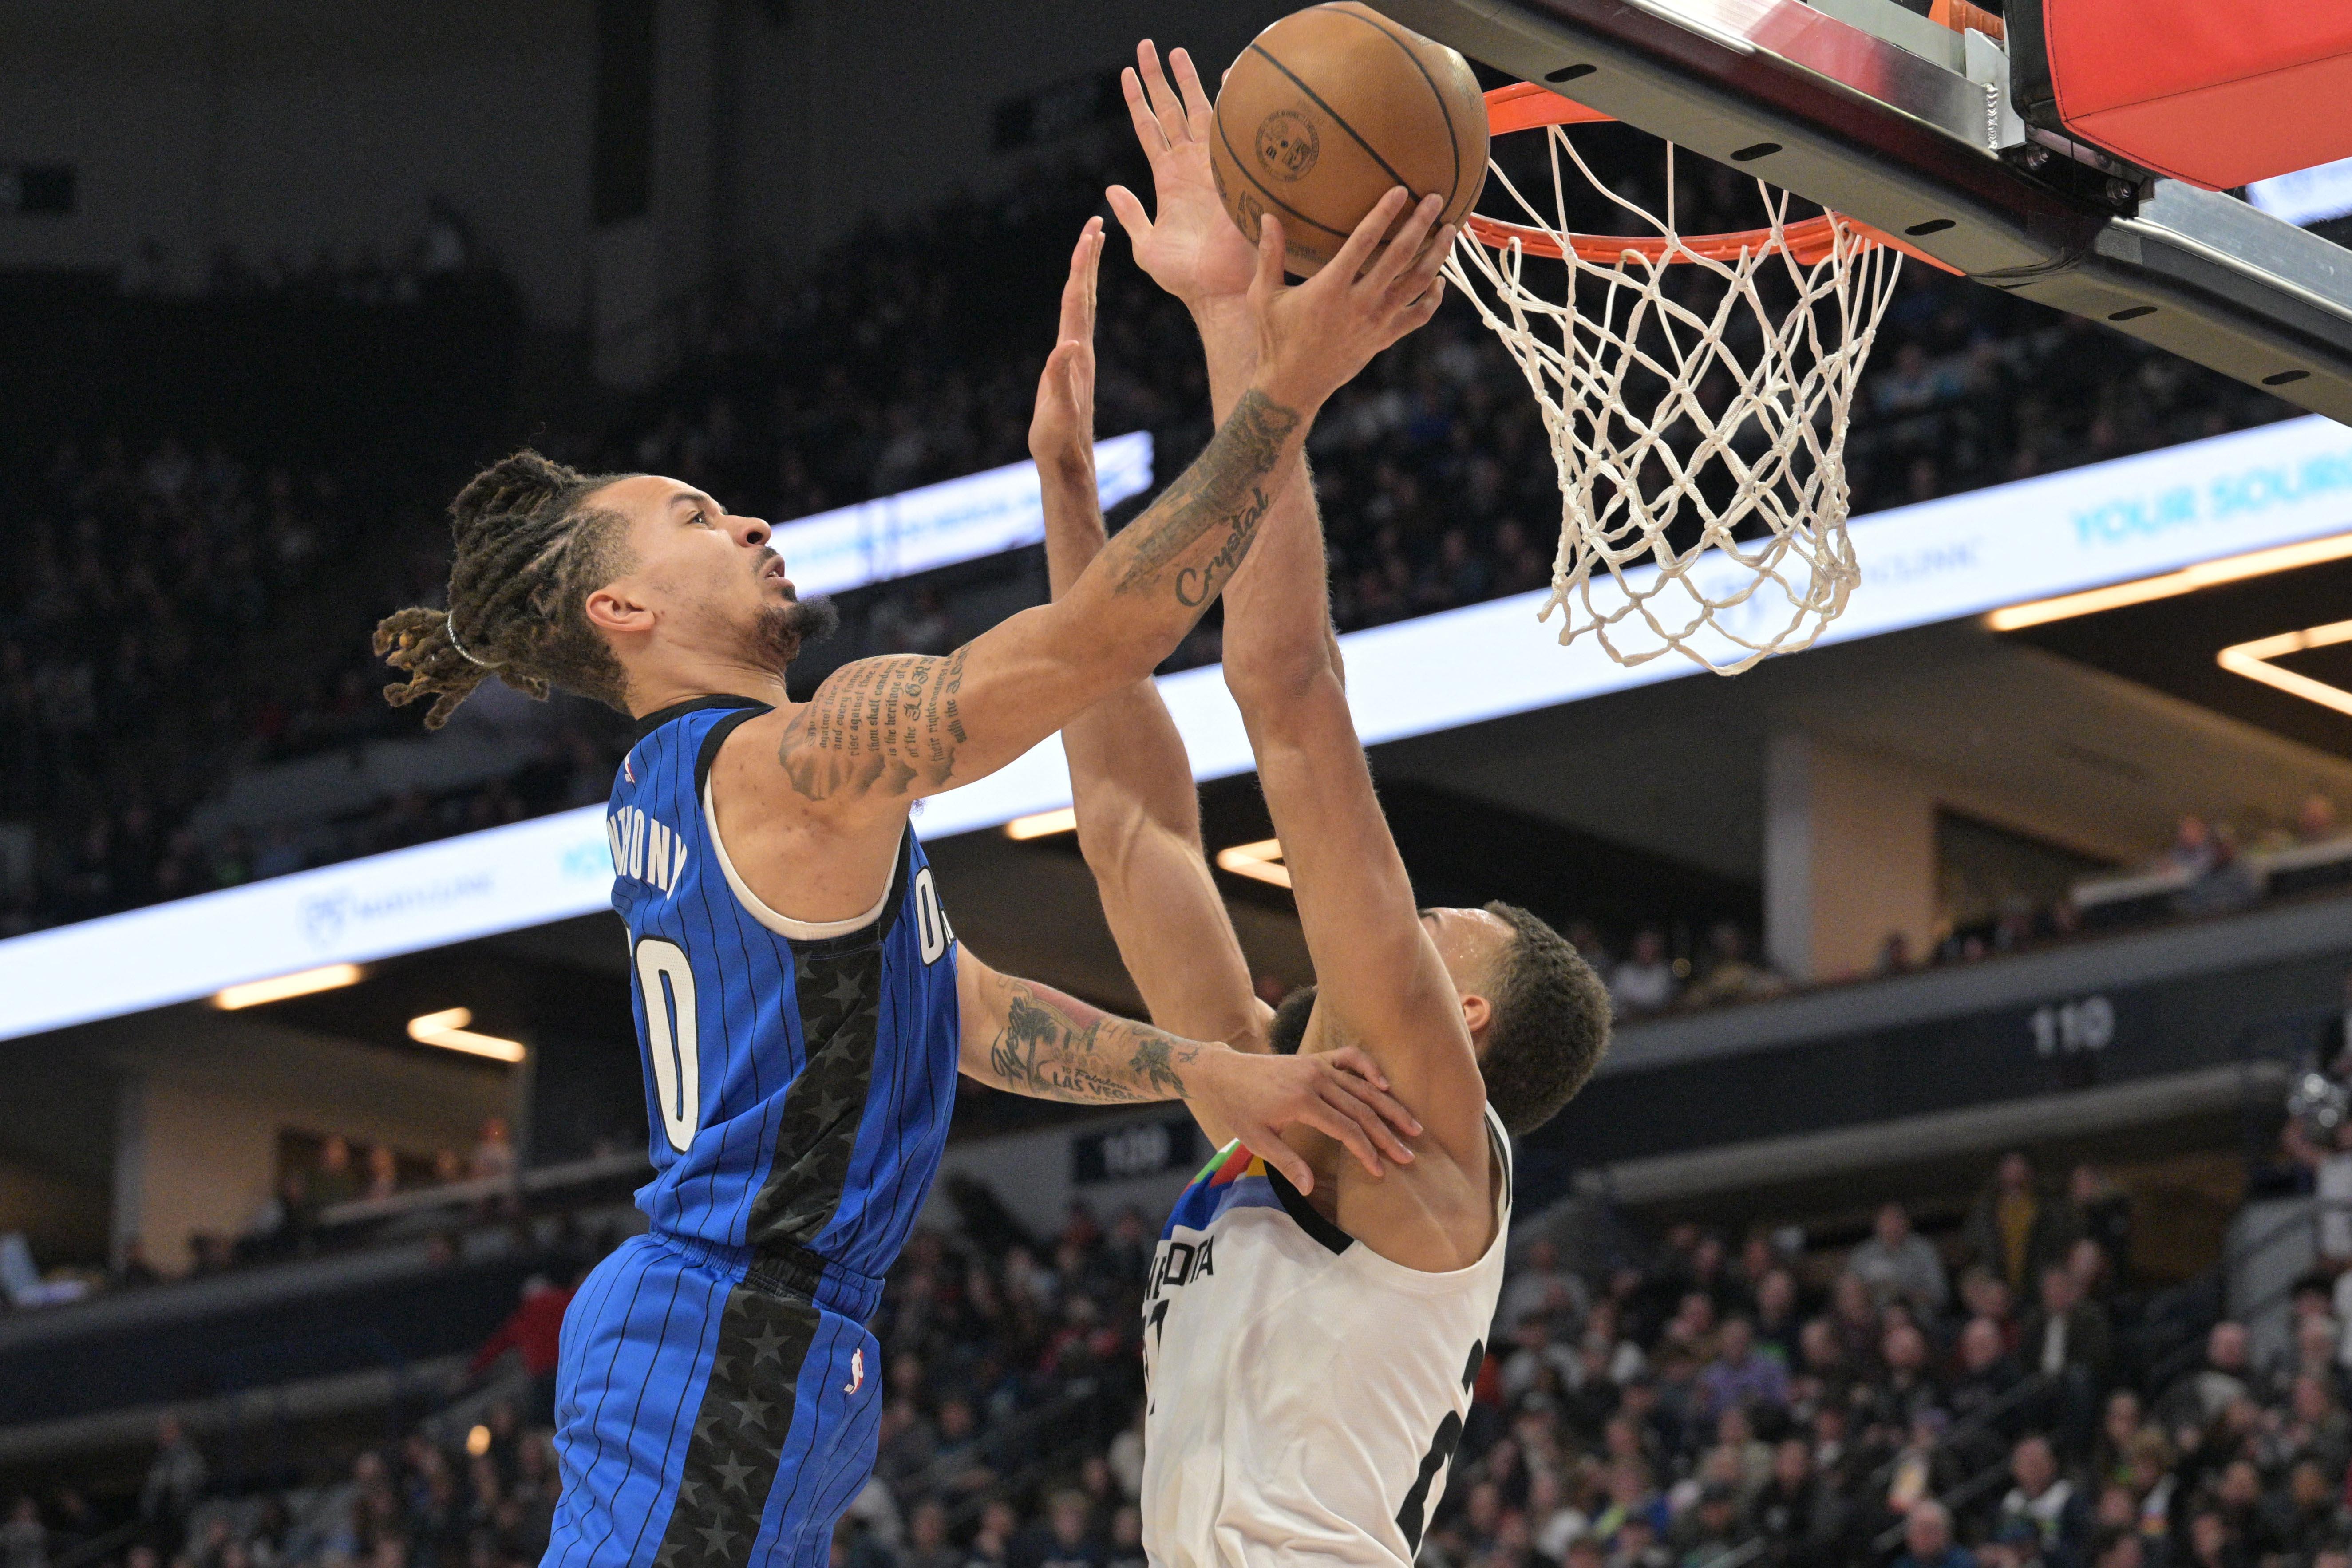 Orlando Magic guard Cole Anthony (50) brings the ball up the court